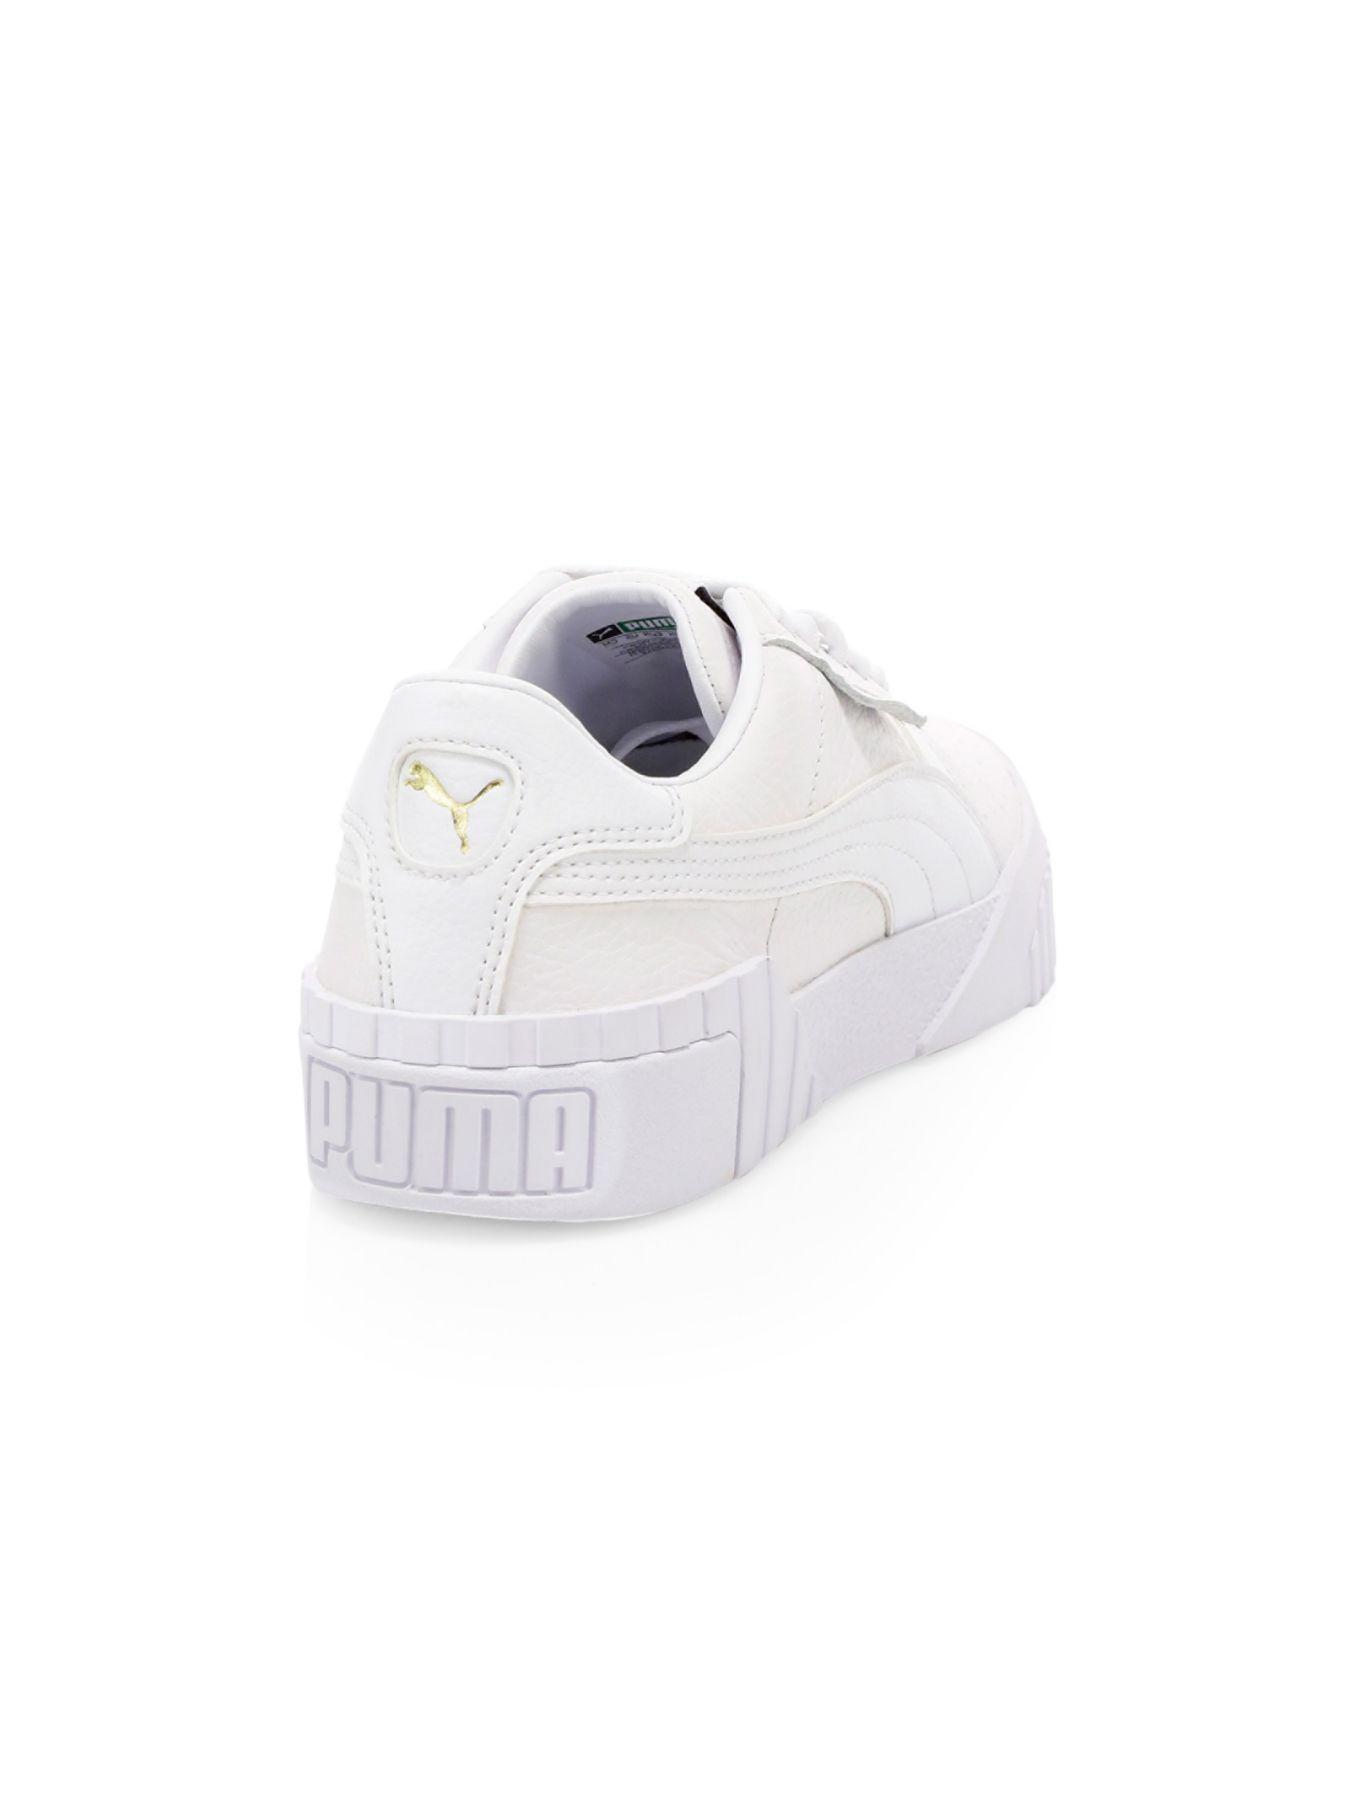 PUMA Rubber Cali Platform Leather Sneakers in White - Save 6% - Lyst